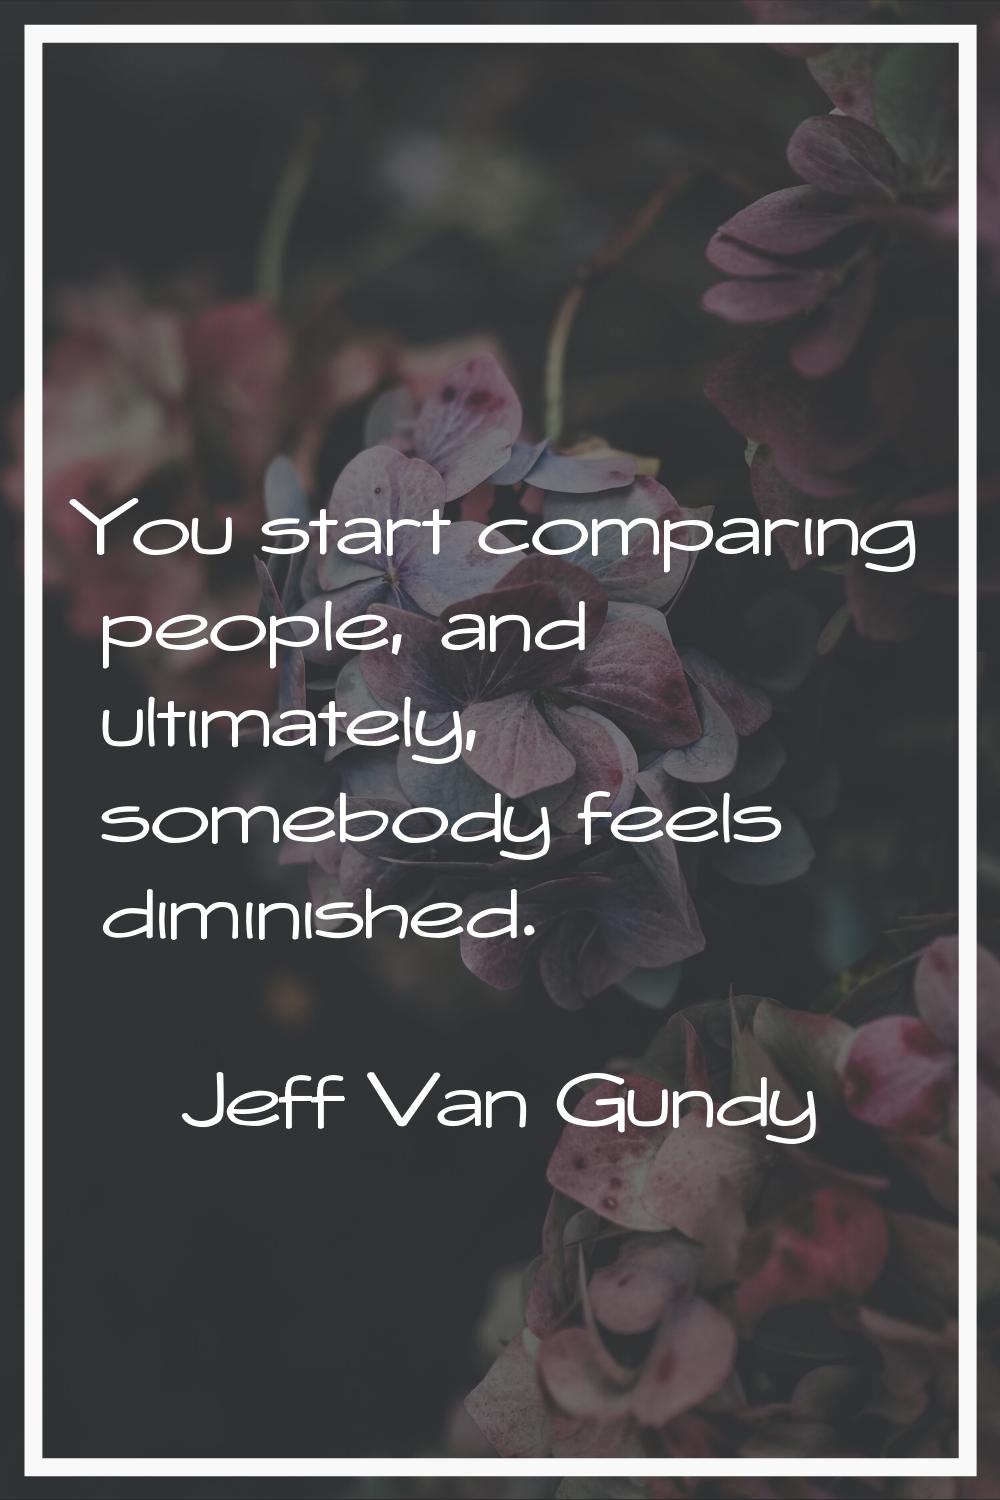 You start comparing people, and ultimately, somebody feels diminished.